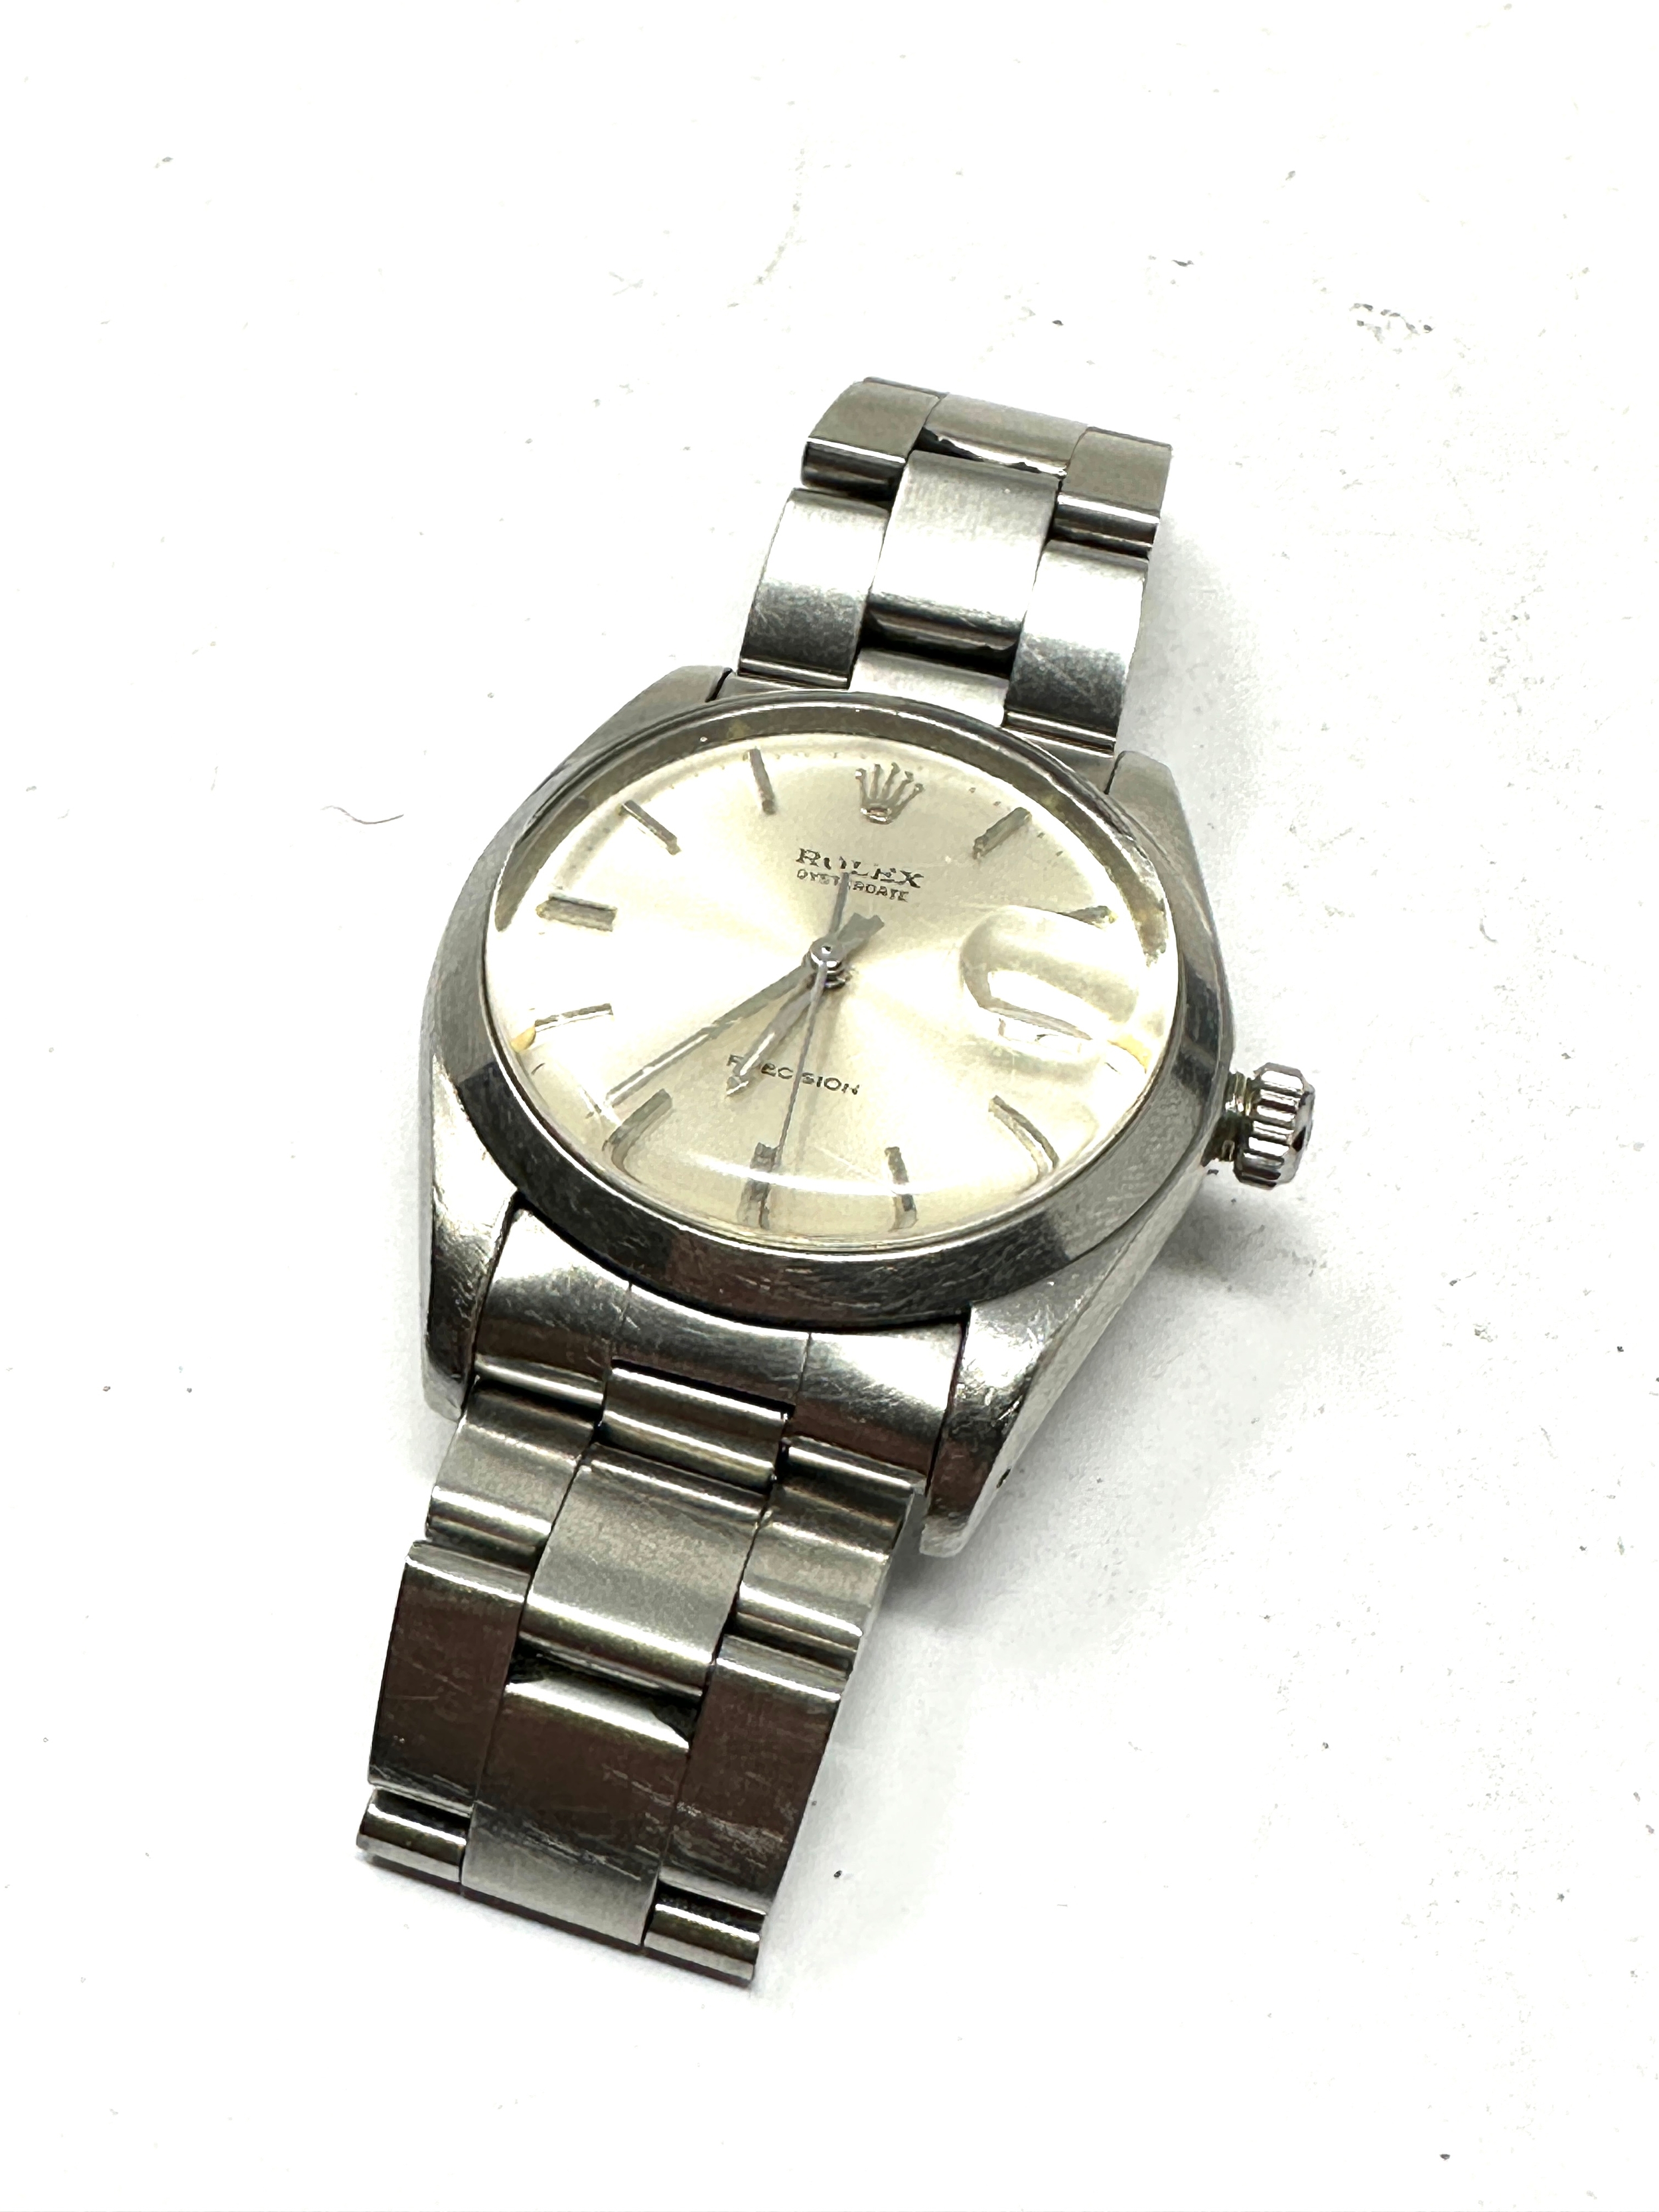 Rolex Oysterdate Precision Stainless Steel Wrist Watch & strap the watch is ticking winder does